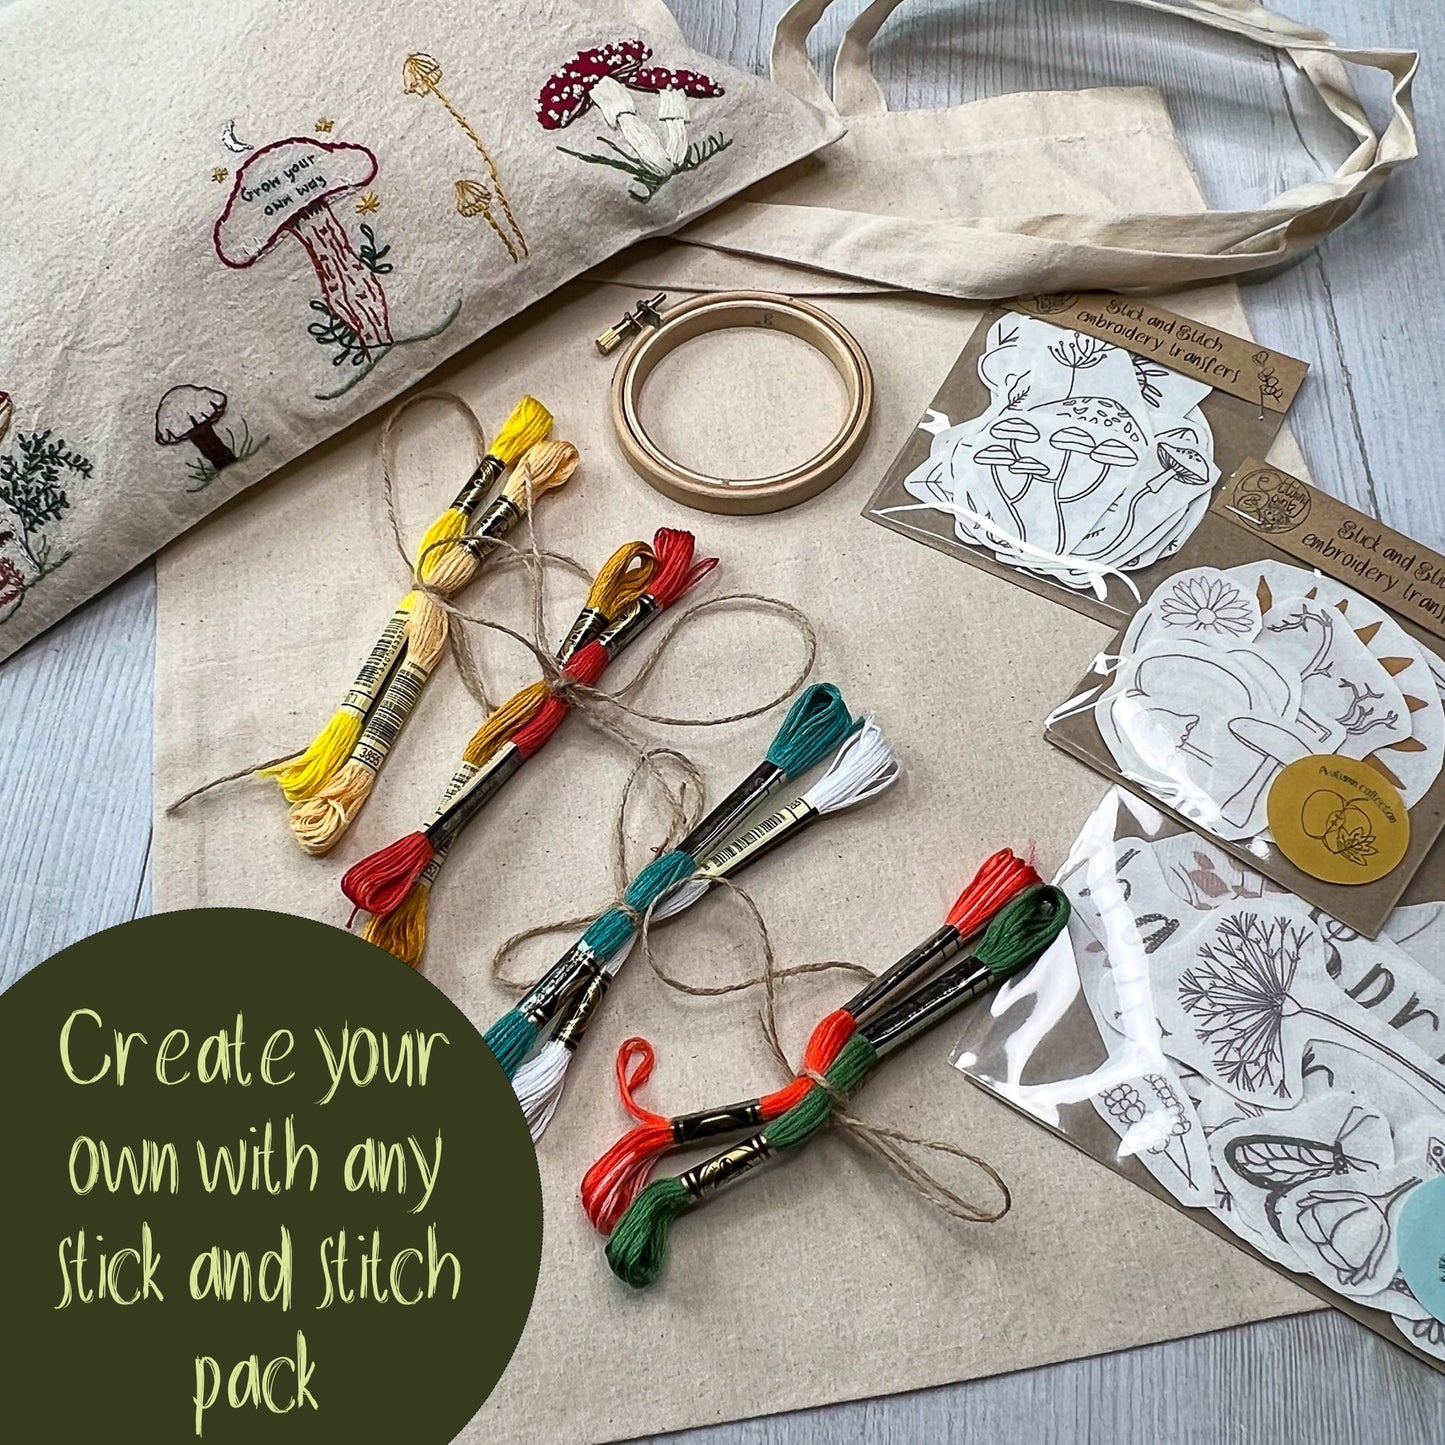 Embroider your own Tote bag  kit